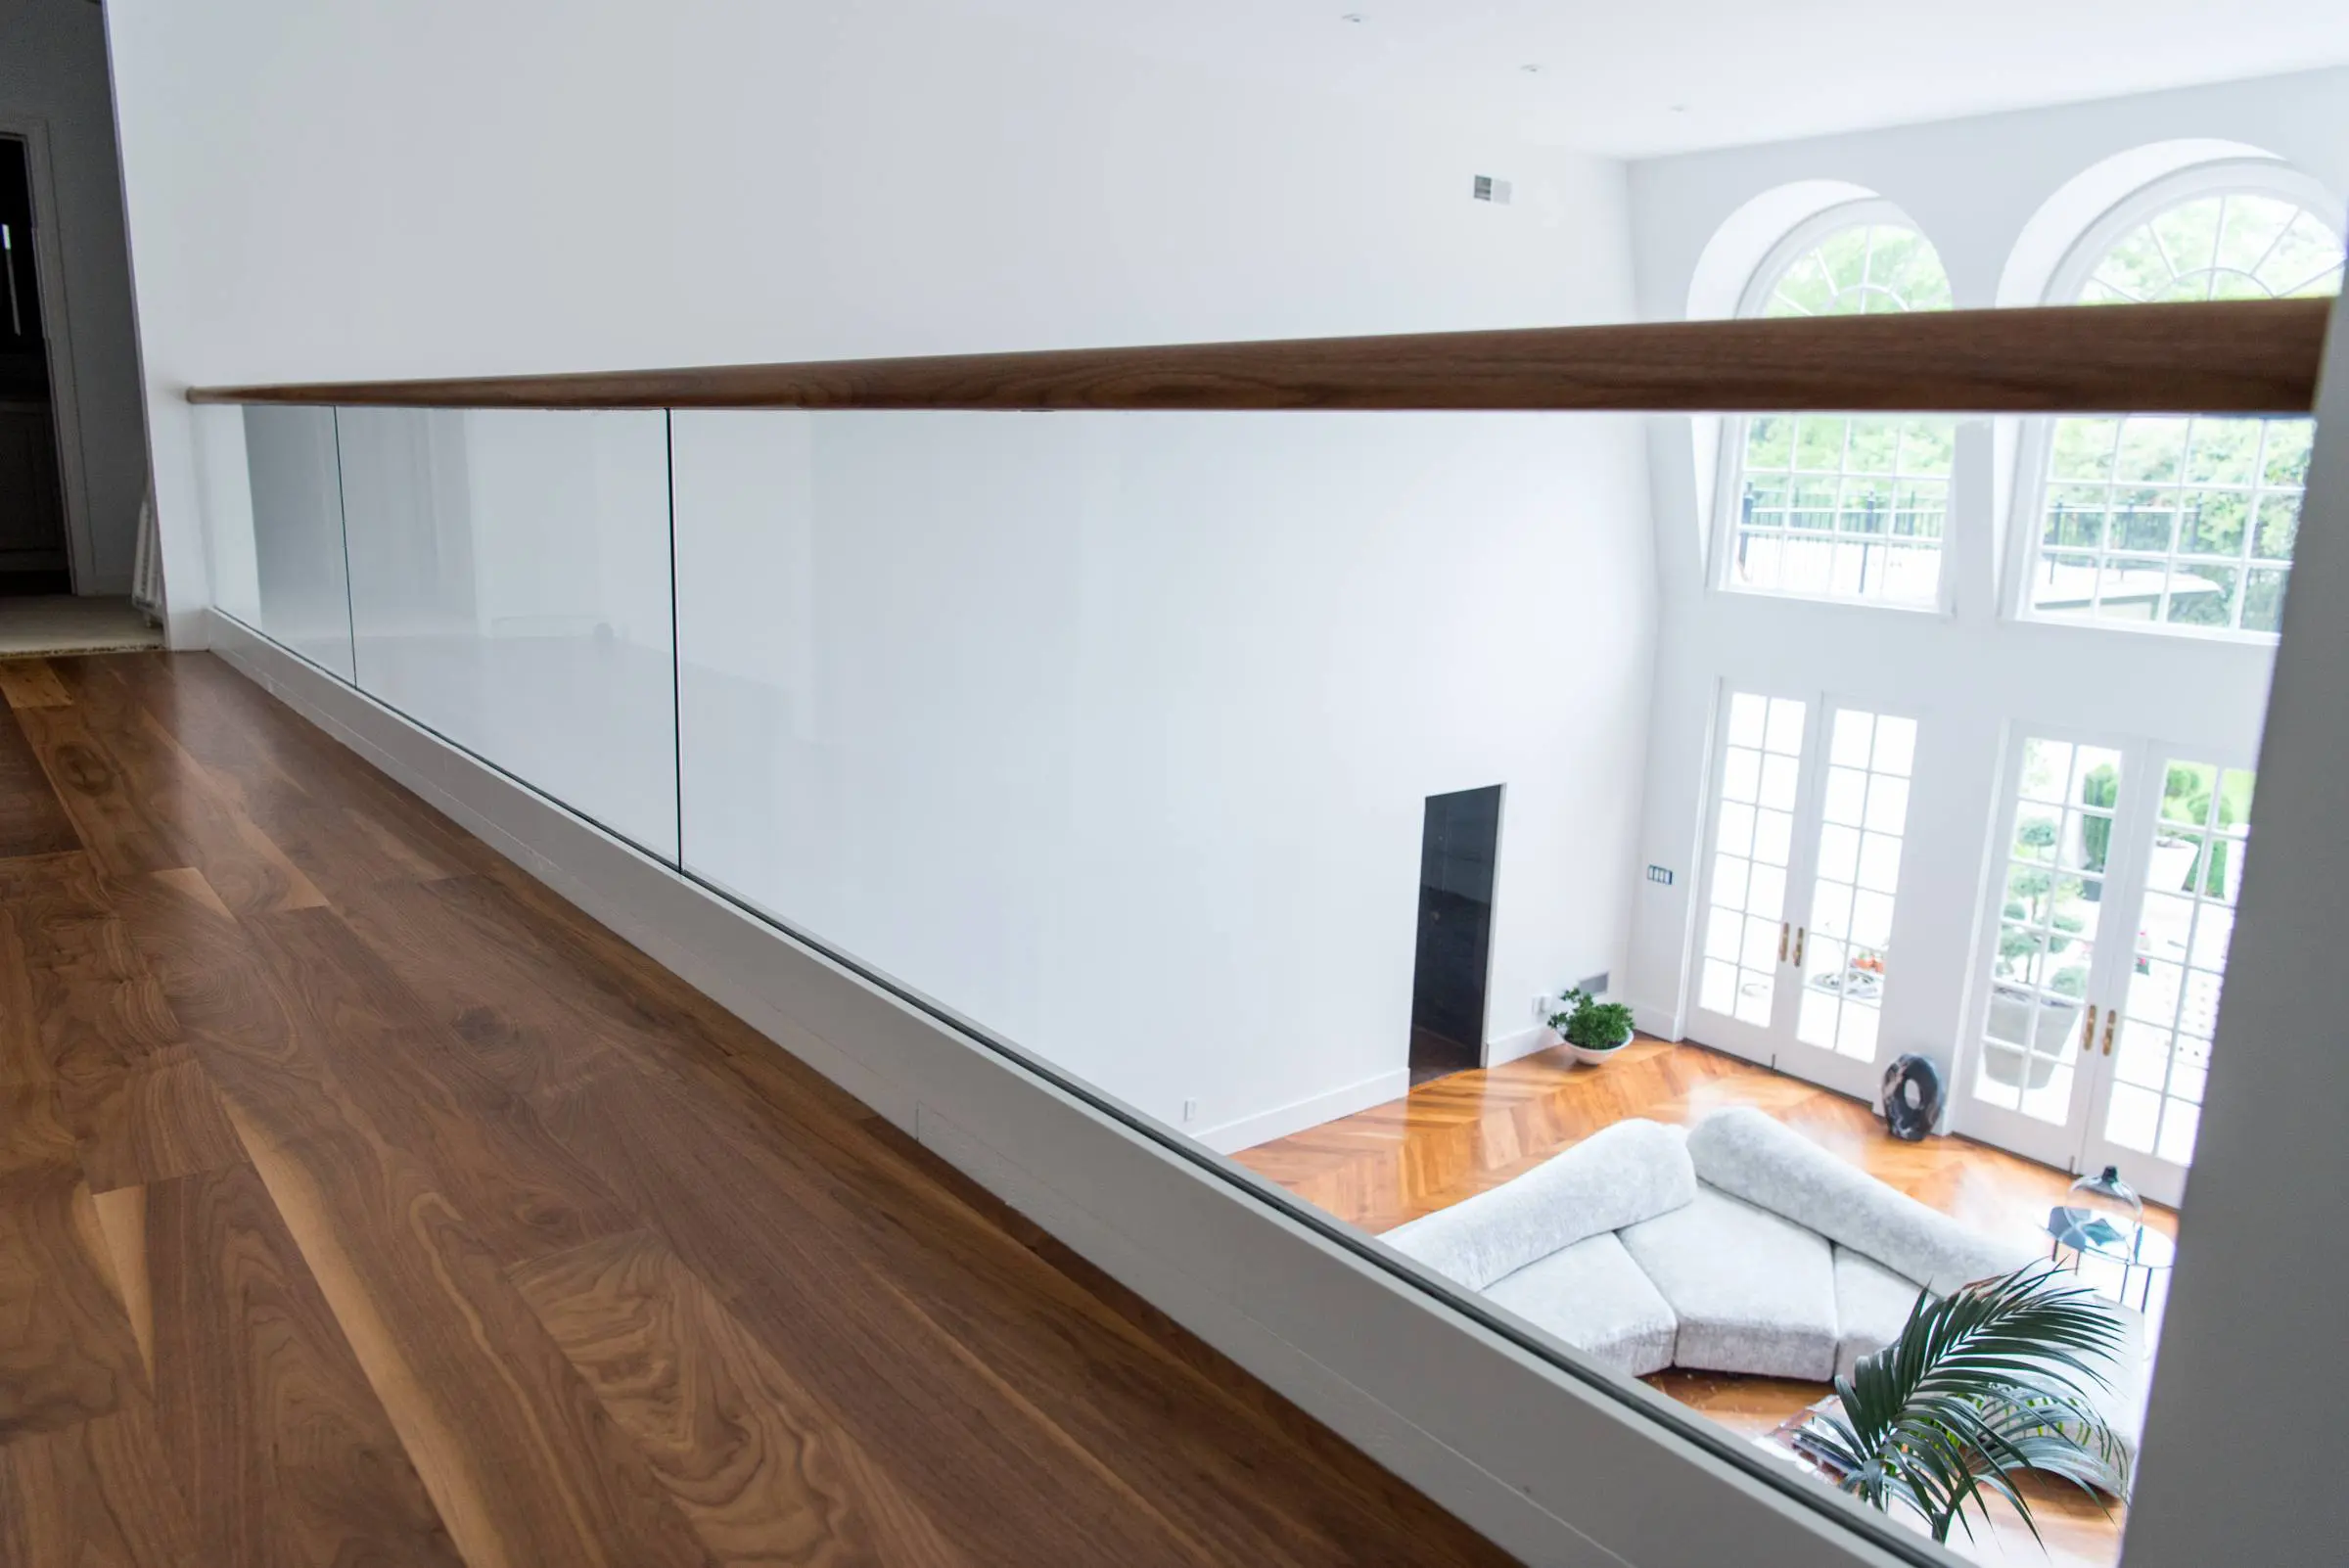 Glass railing for a balcony overlooking the living area.